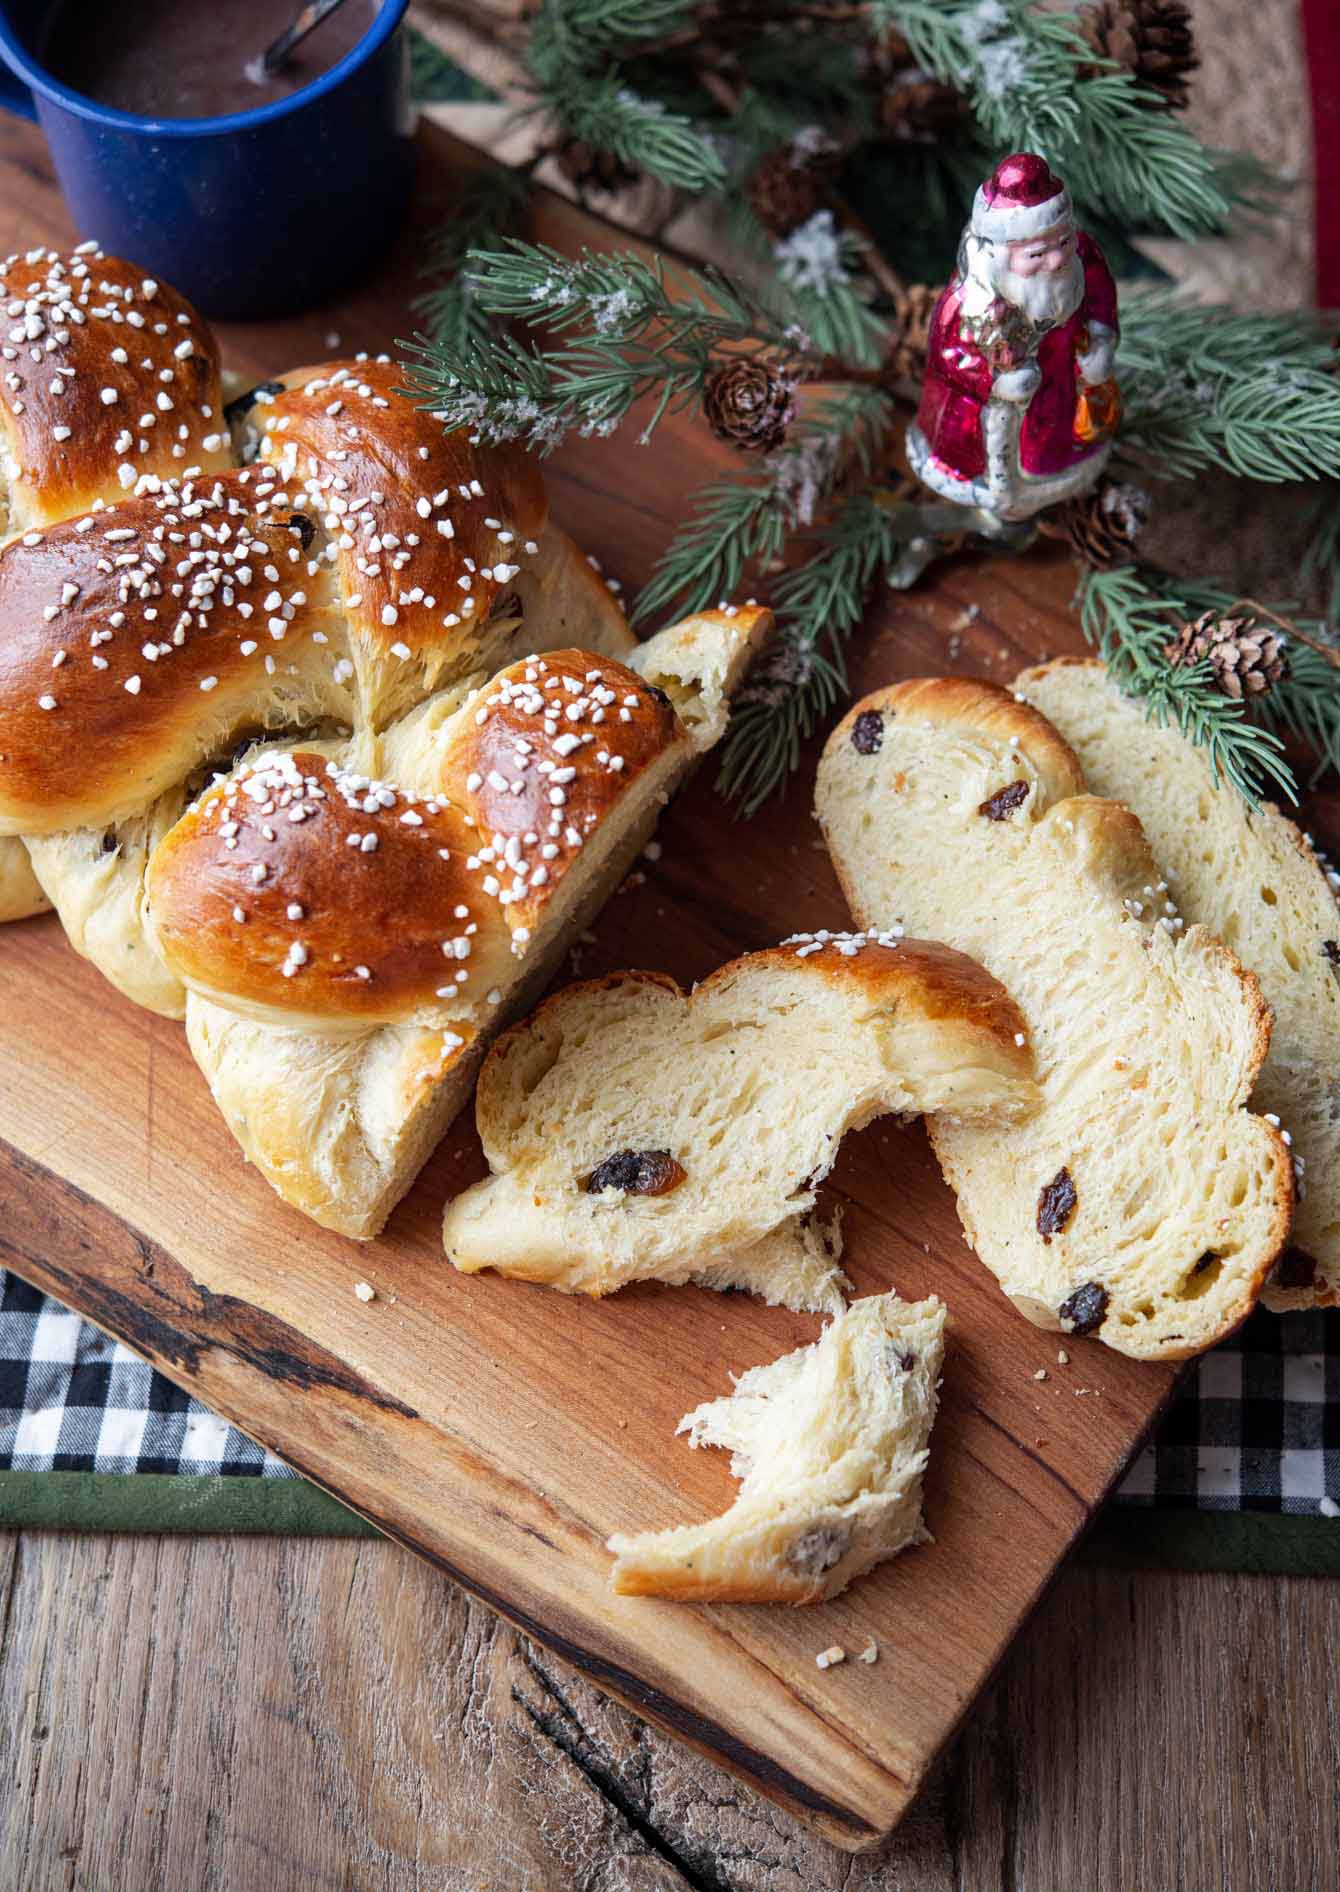 Finnish cardamom bread slices with holiday ornaments.